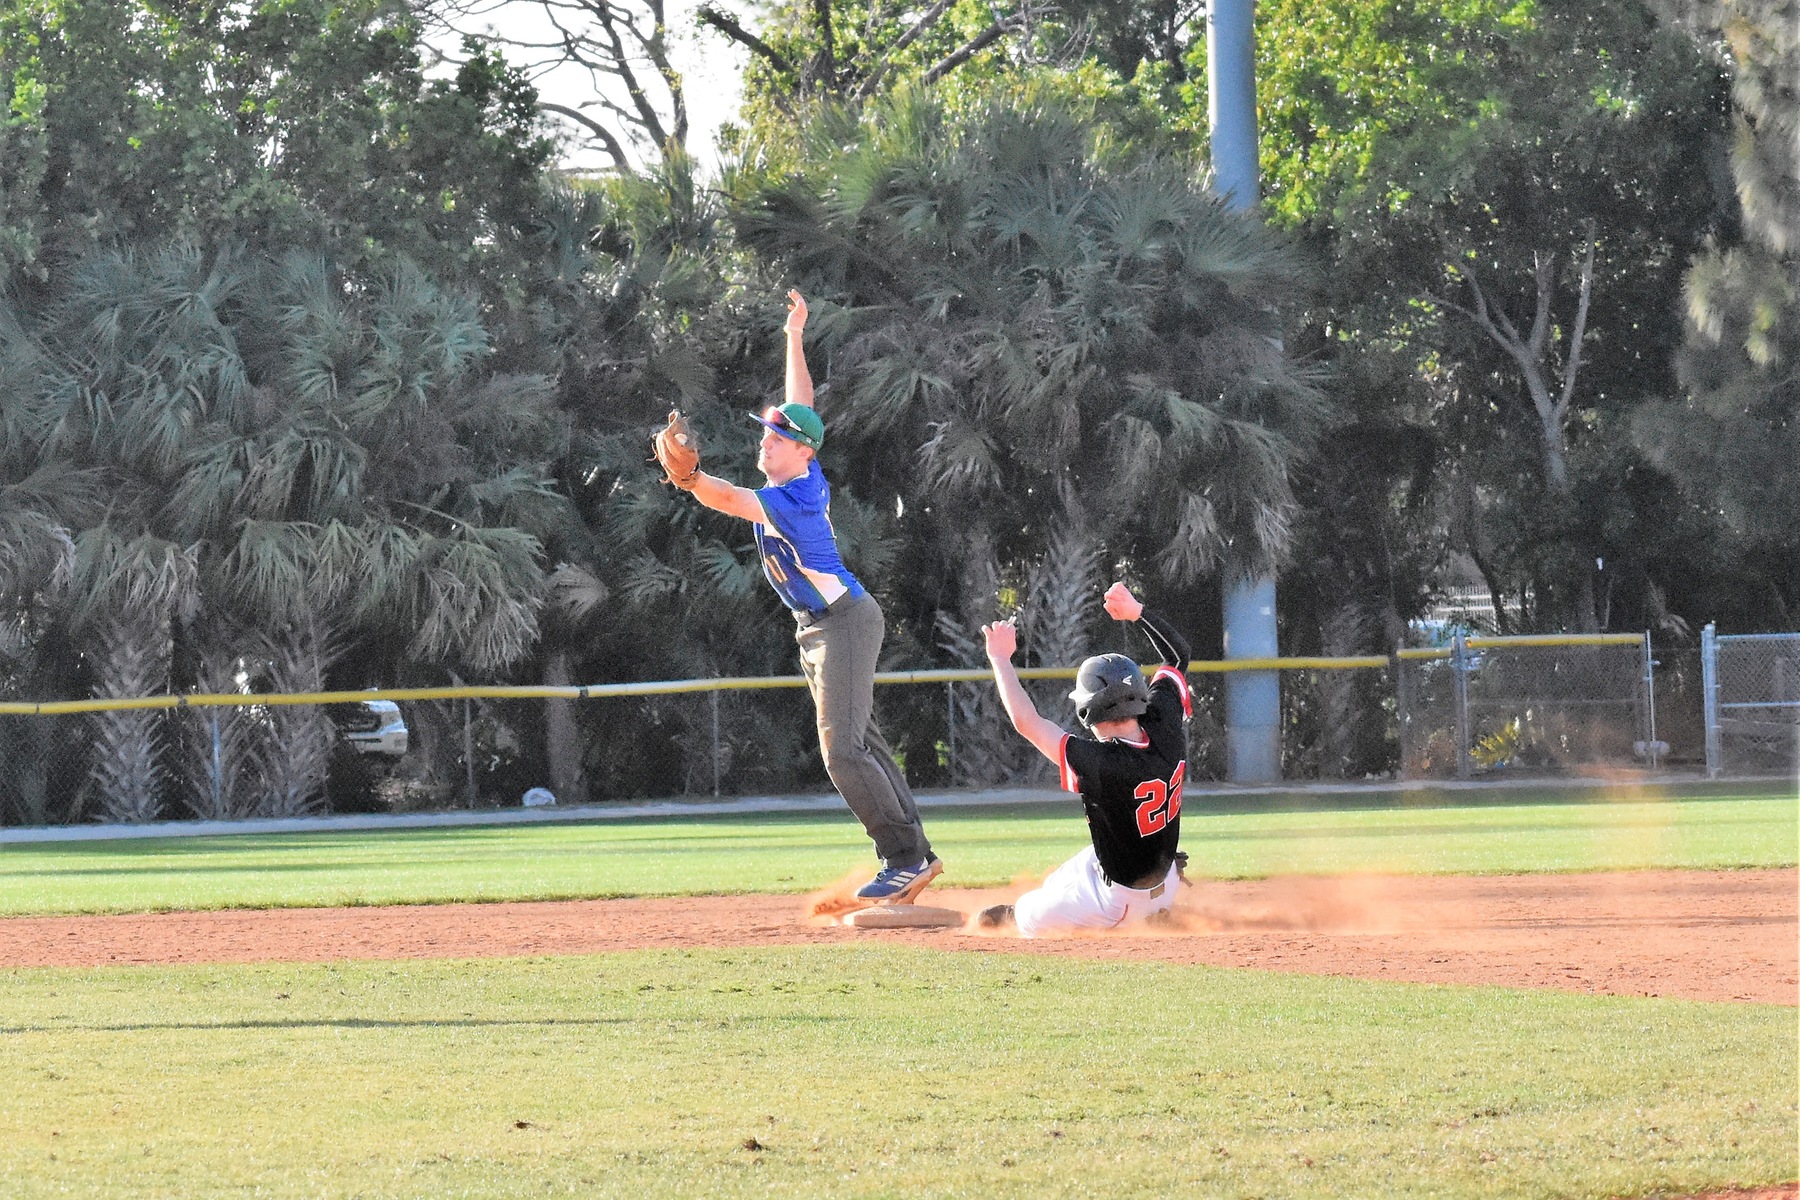 Jeff Allen stretches to catch a ball on second base as a runner slides in